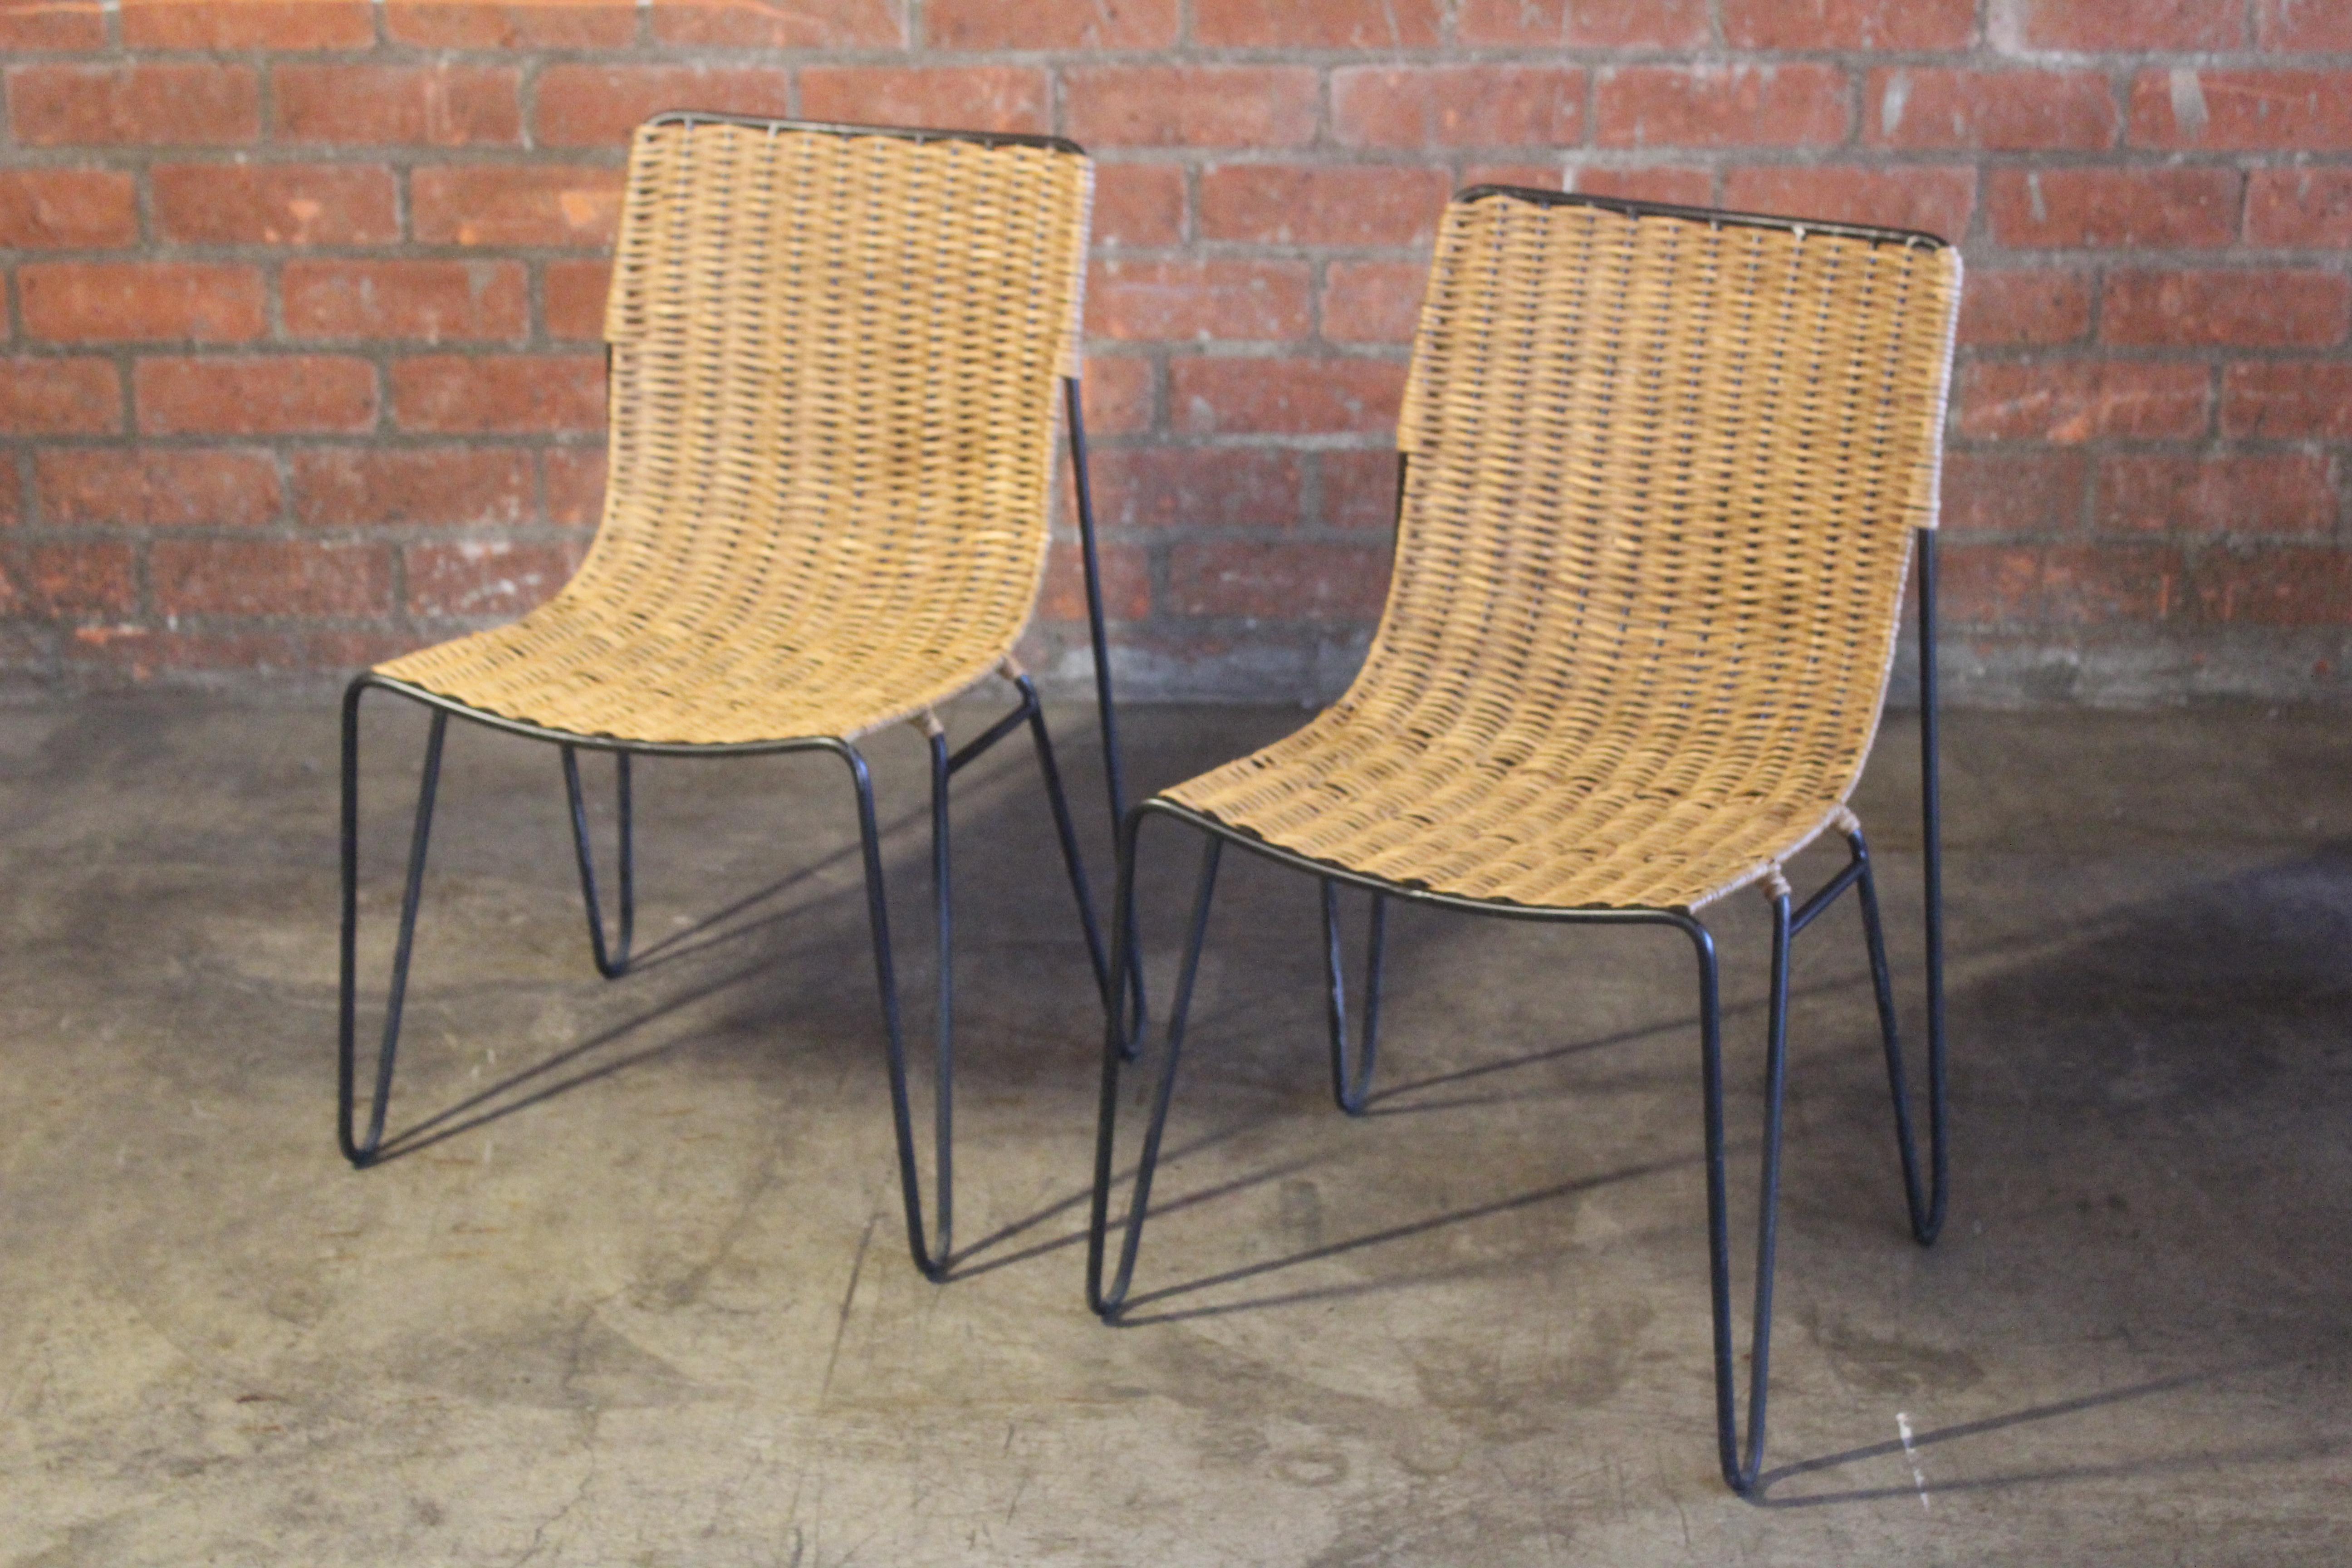 Mid-20th Century Pair of Wicker and Iron Side Chairs For Sale